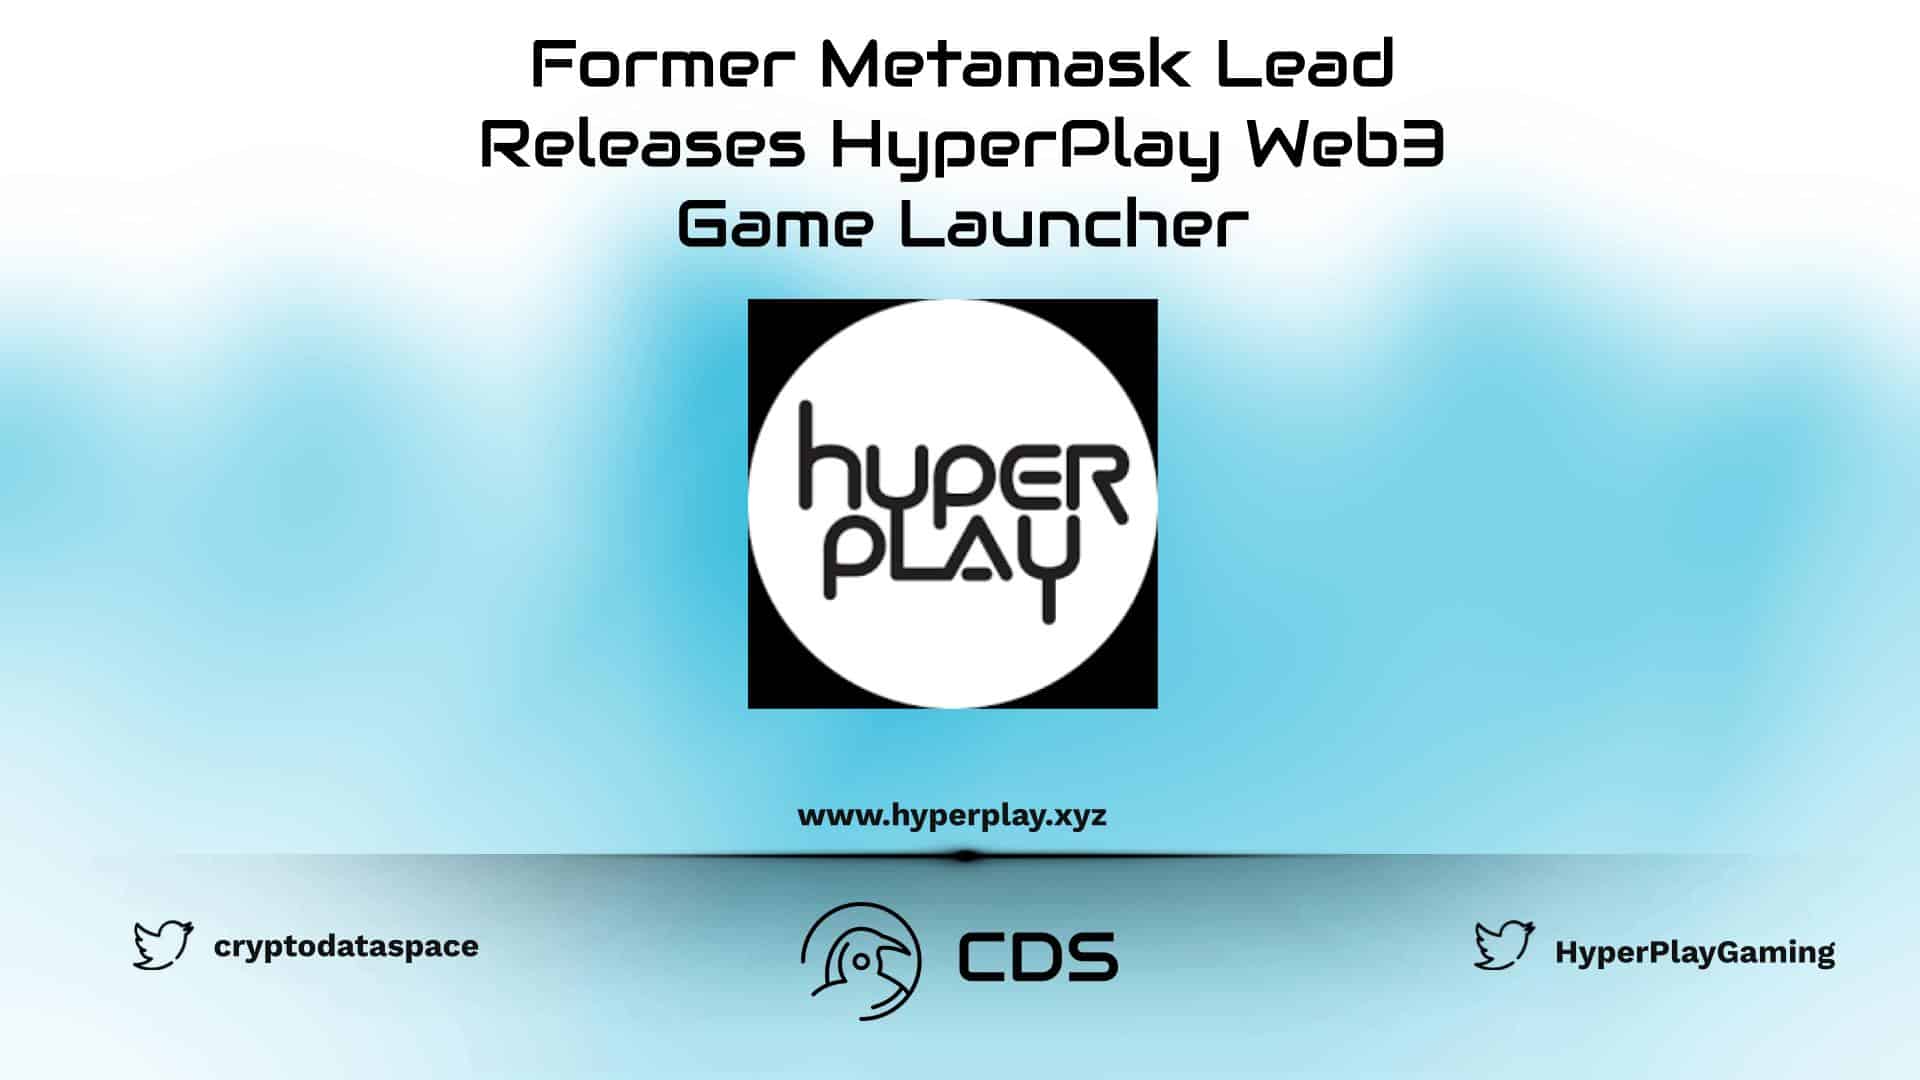 Former Metamask Lead Releases HyperPlay Web3 Game Launcher